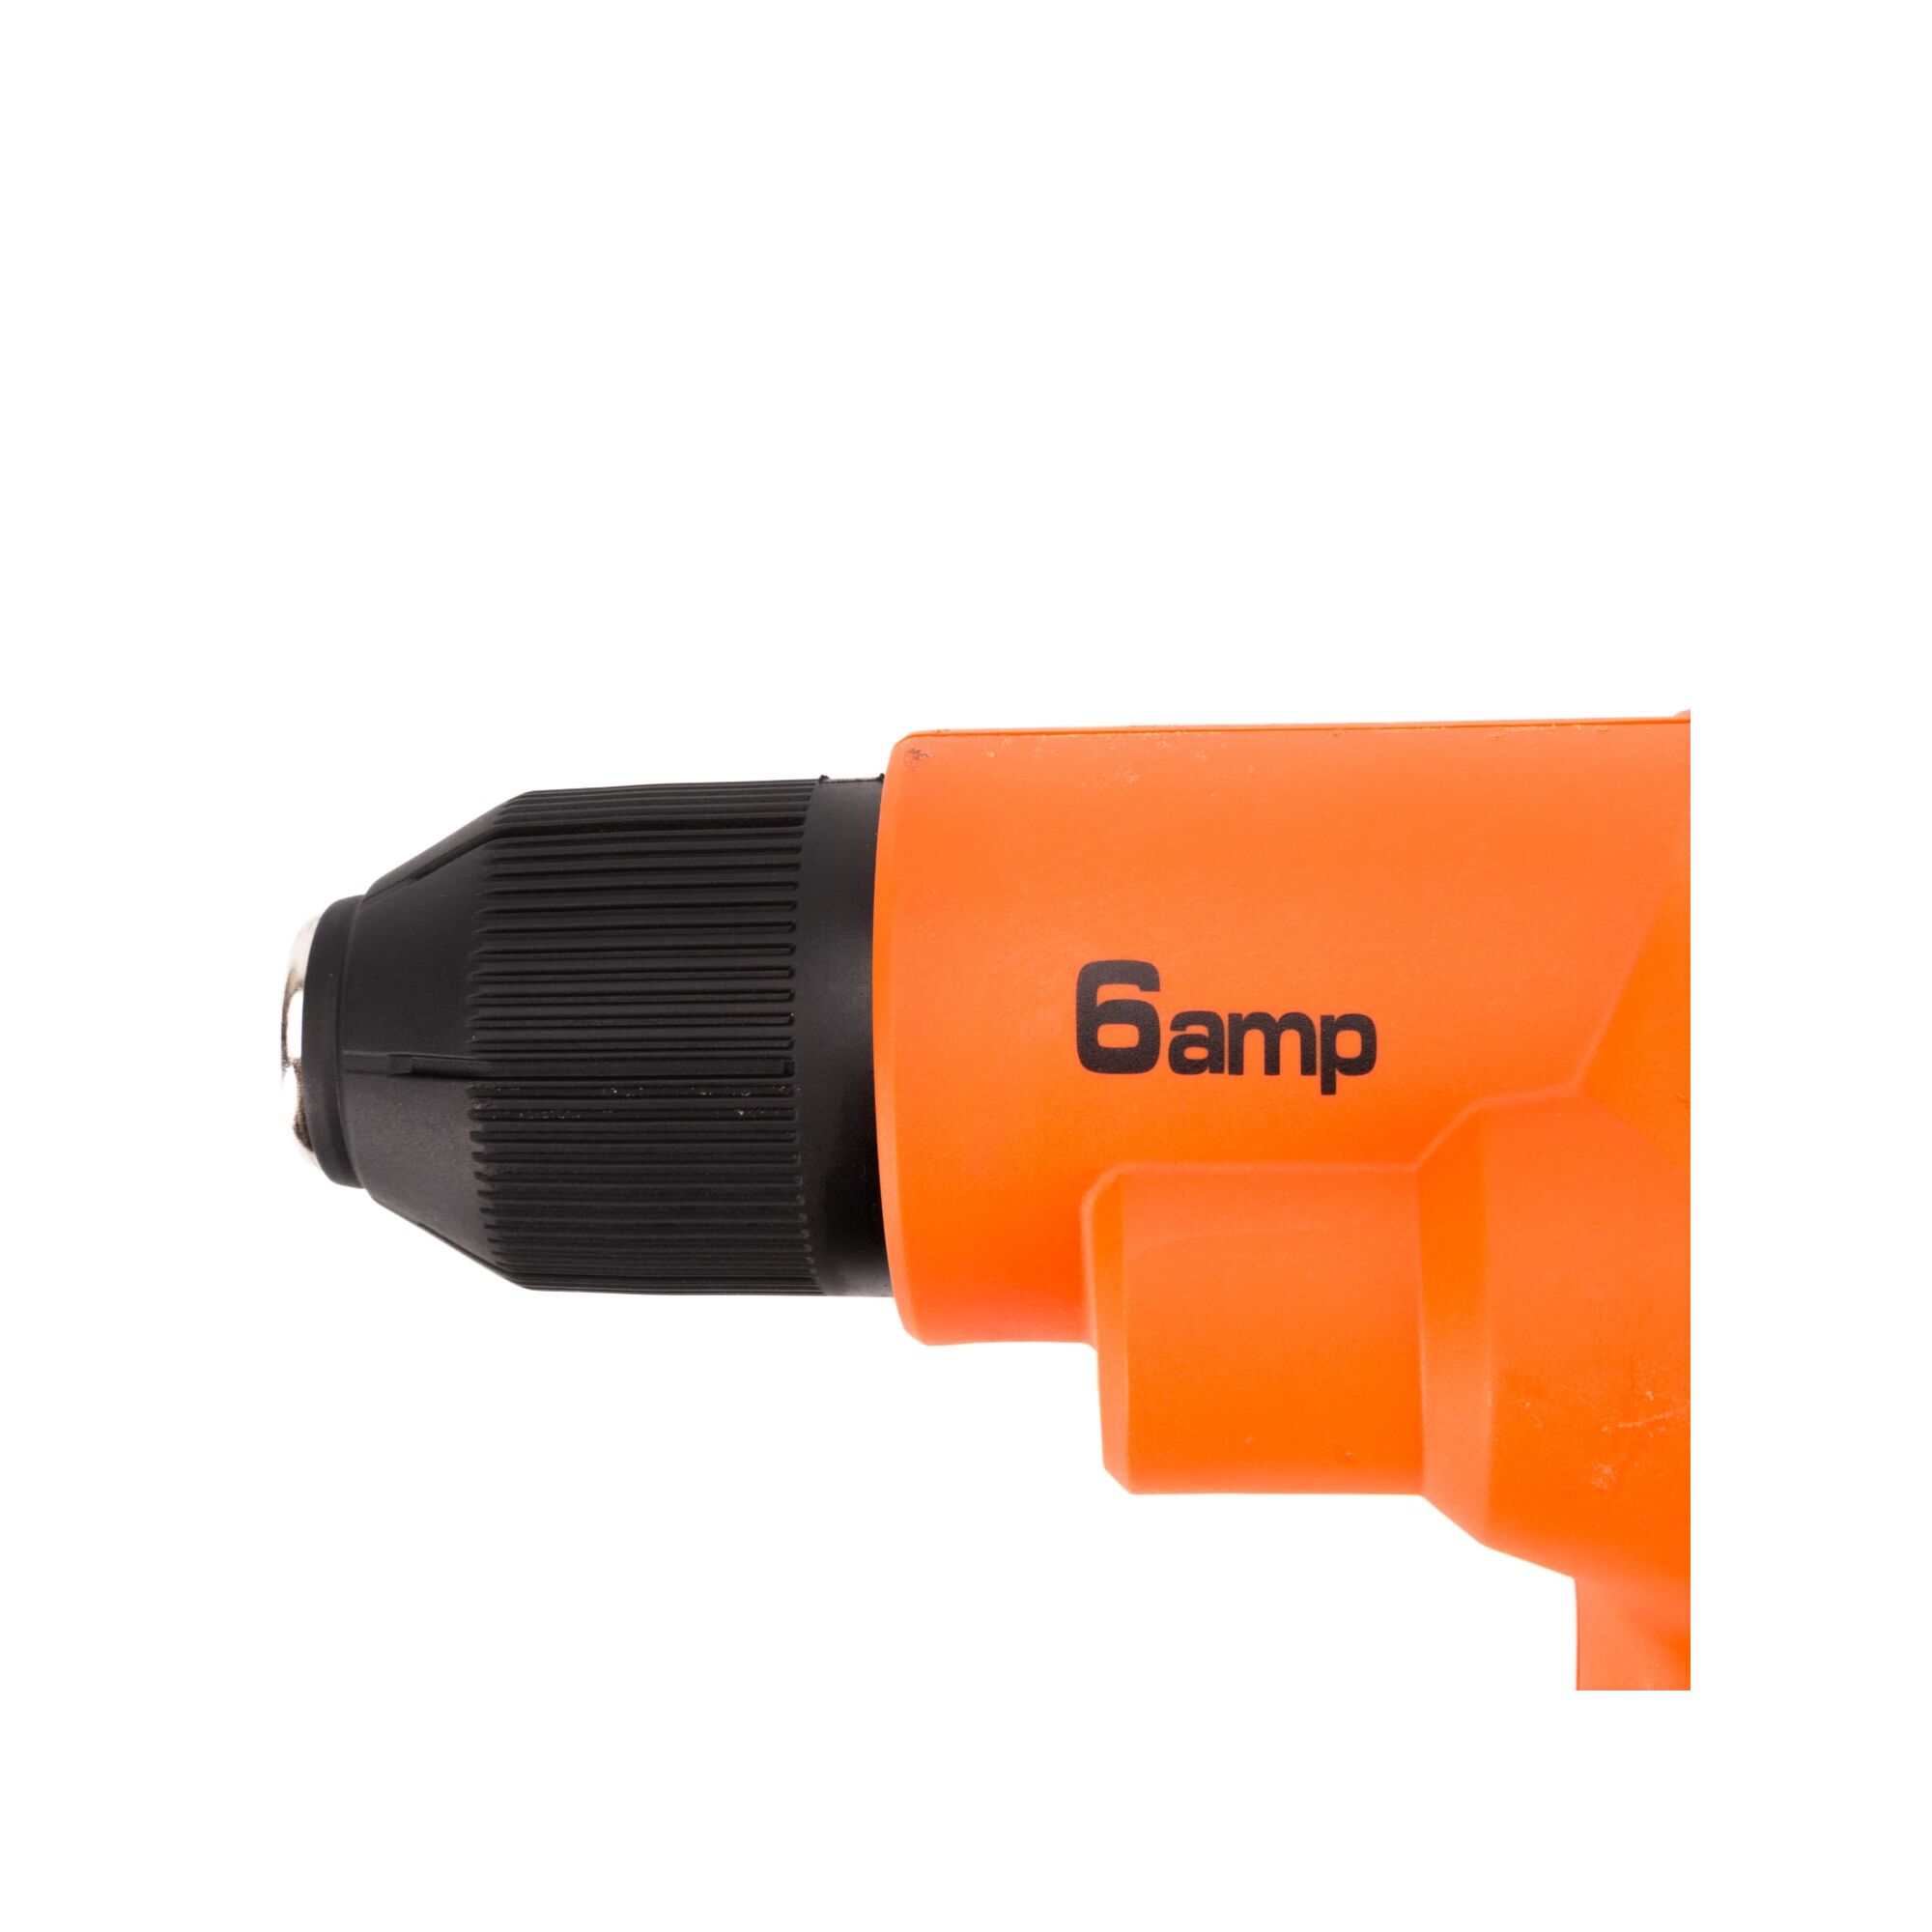 Profile of the Black and decker 6 amp 3 eighths inch drill driver chuck